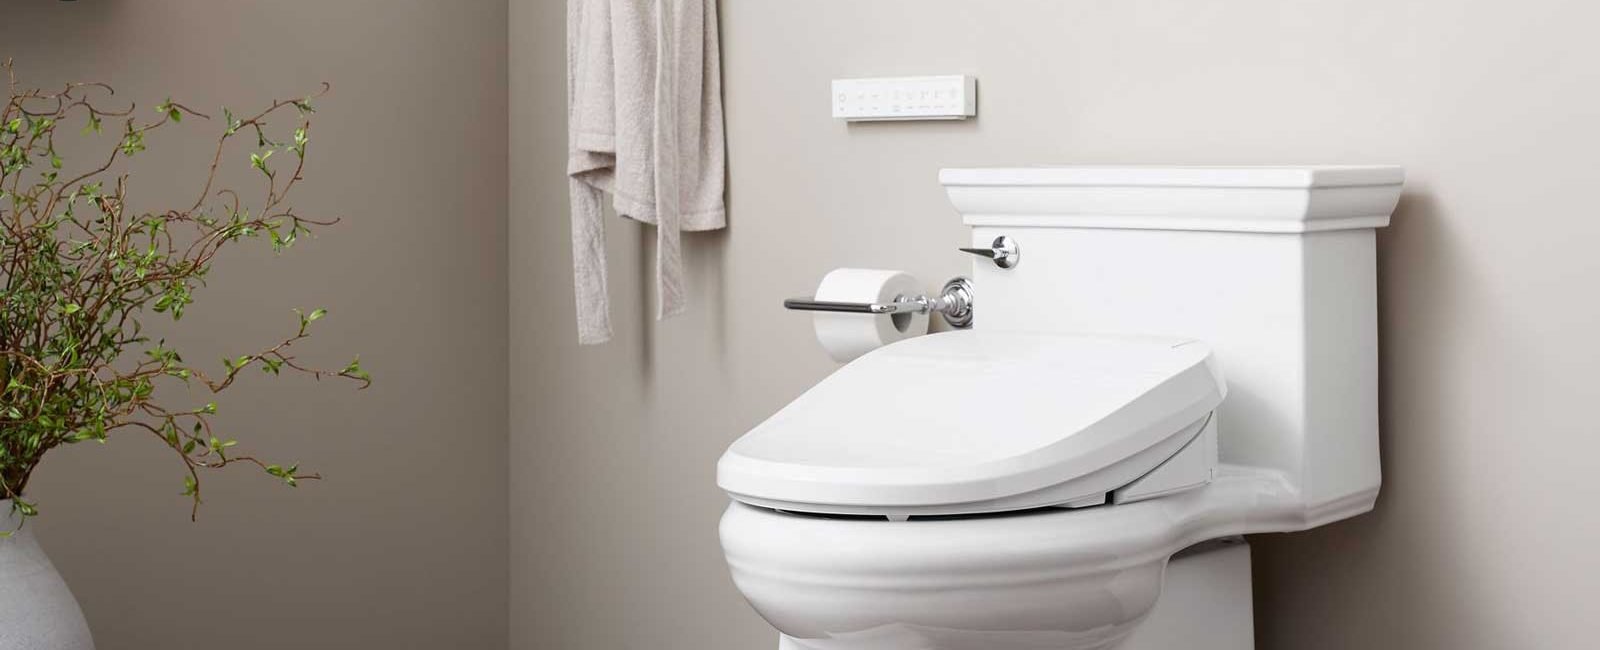 Opt for Bidet for Your Bathroom